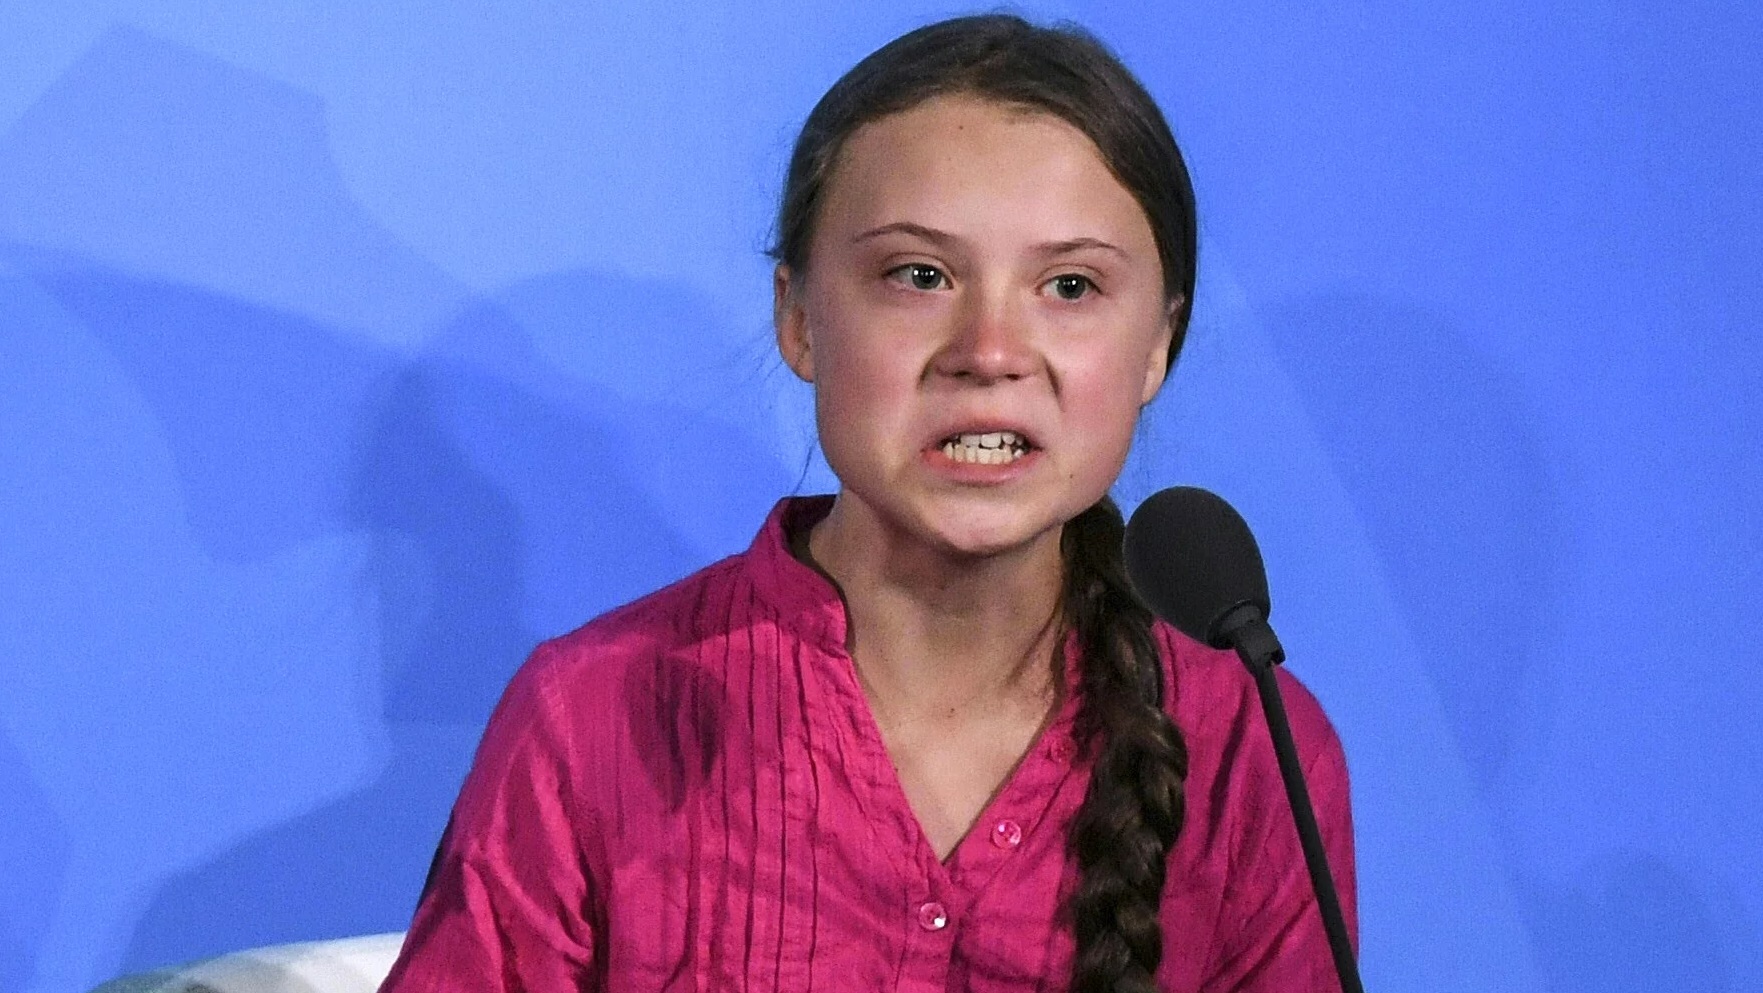 Image: 7-year-old children left psychologically terrorized after hearing Greta Thunberg speech… “I don’t want to die!”